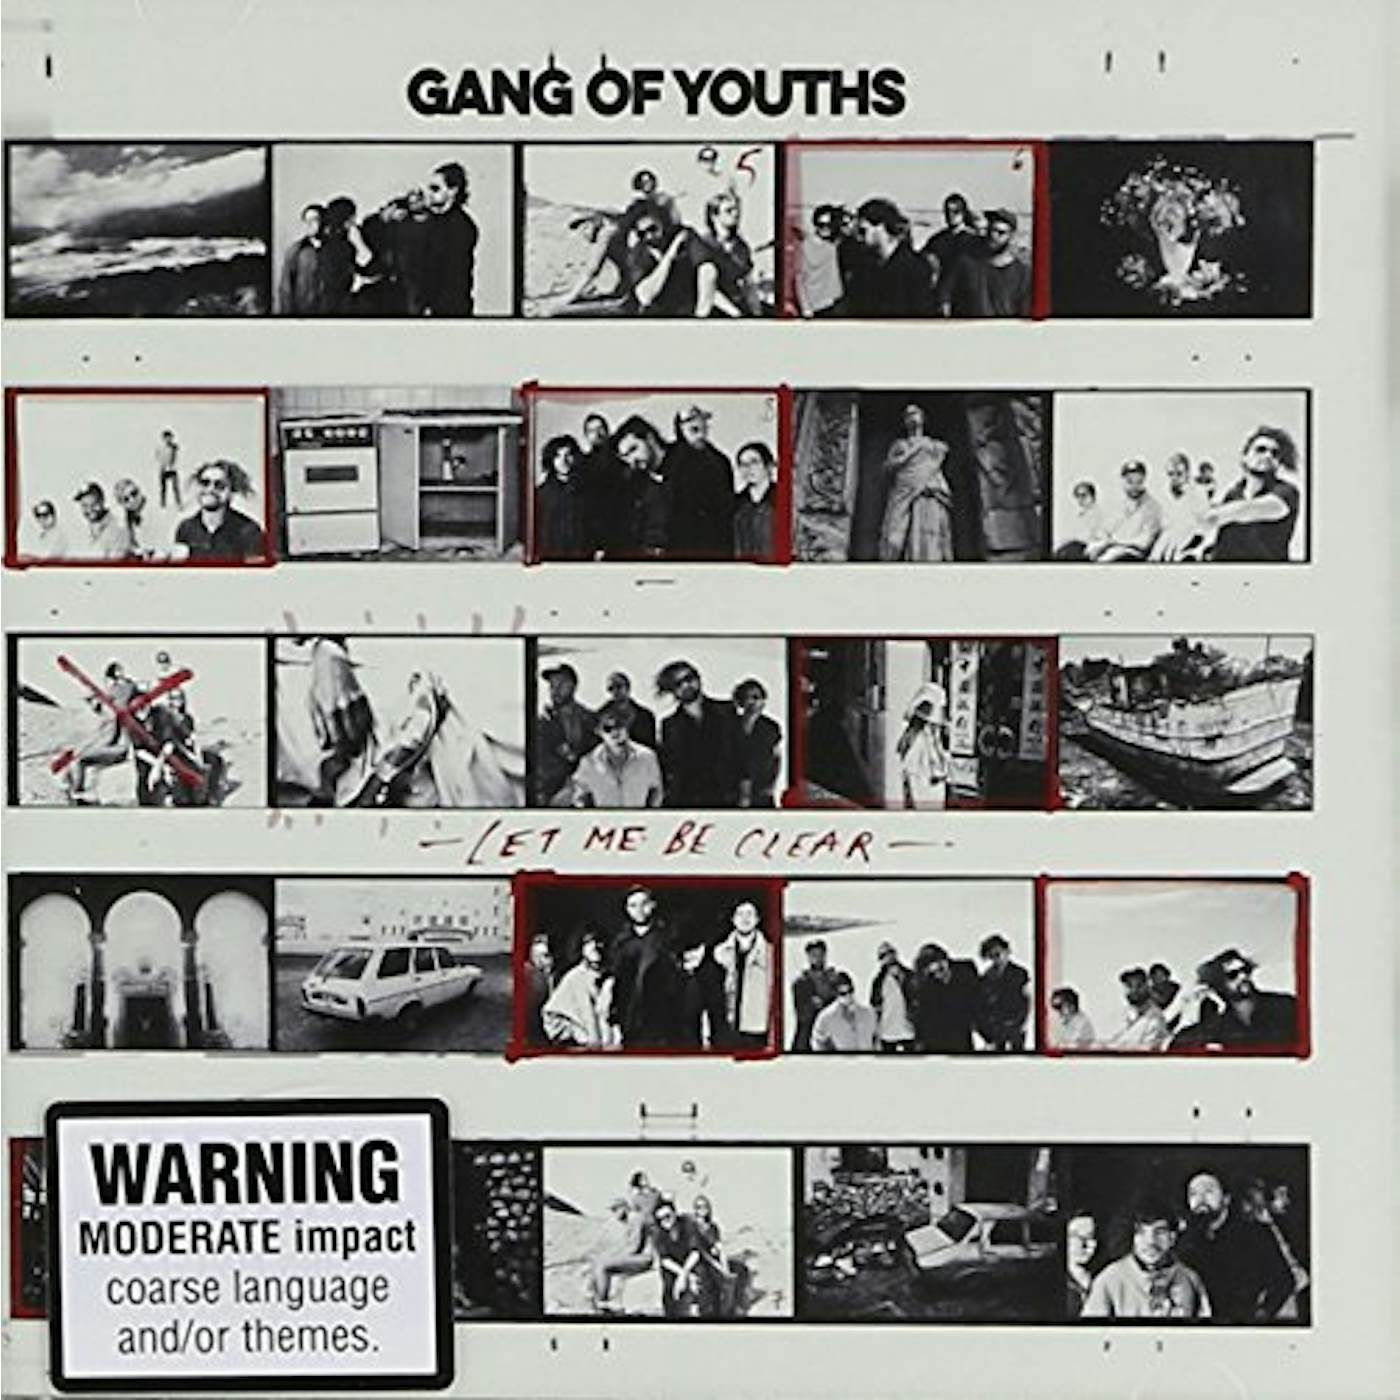 Gang of Youths LET ME BE CLEAR CD